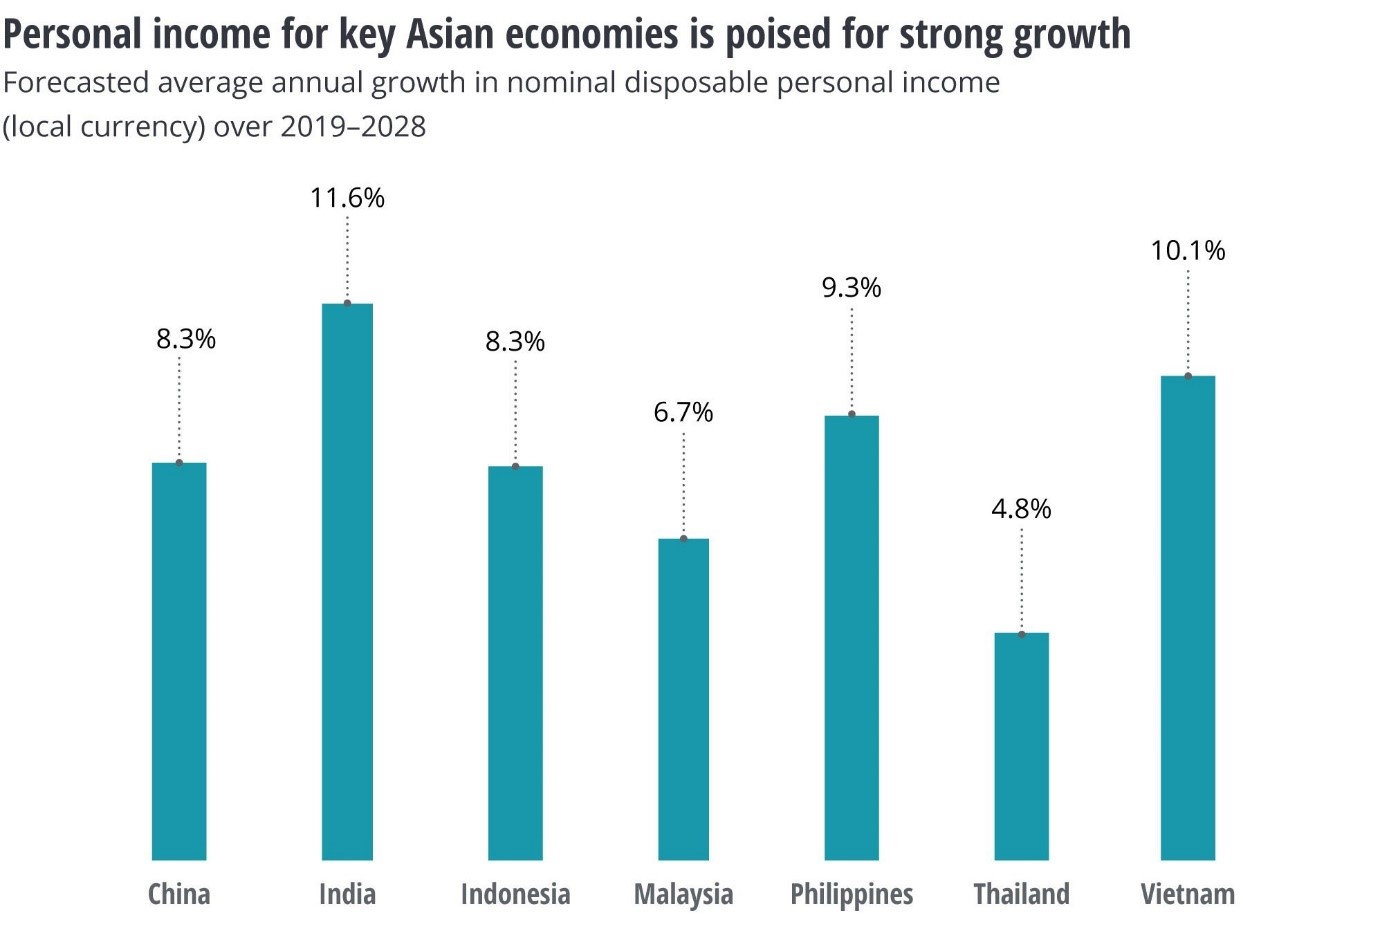 Personal income for key Asian economies is poised for strong growth